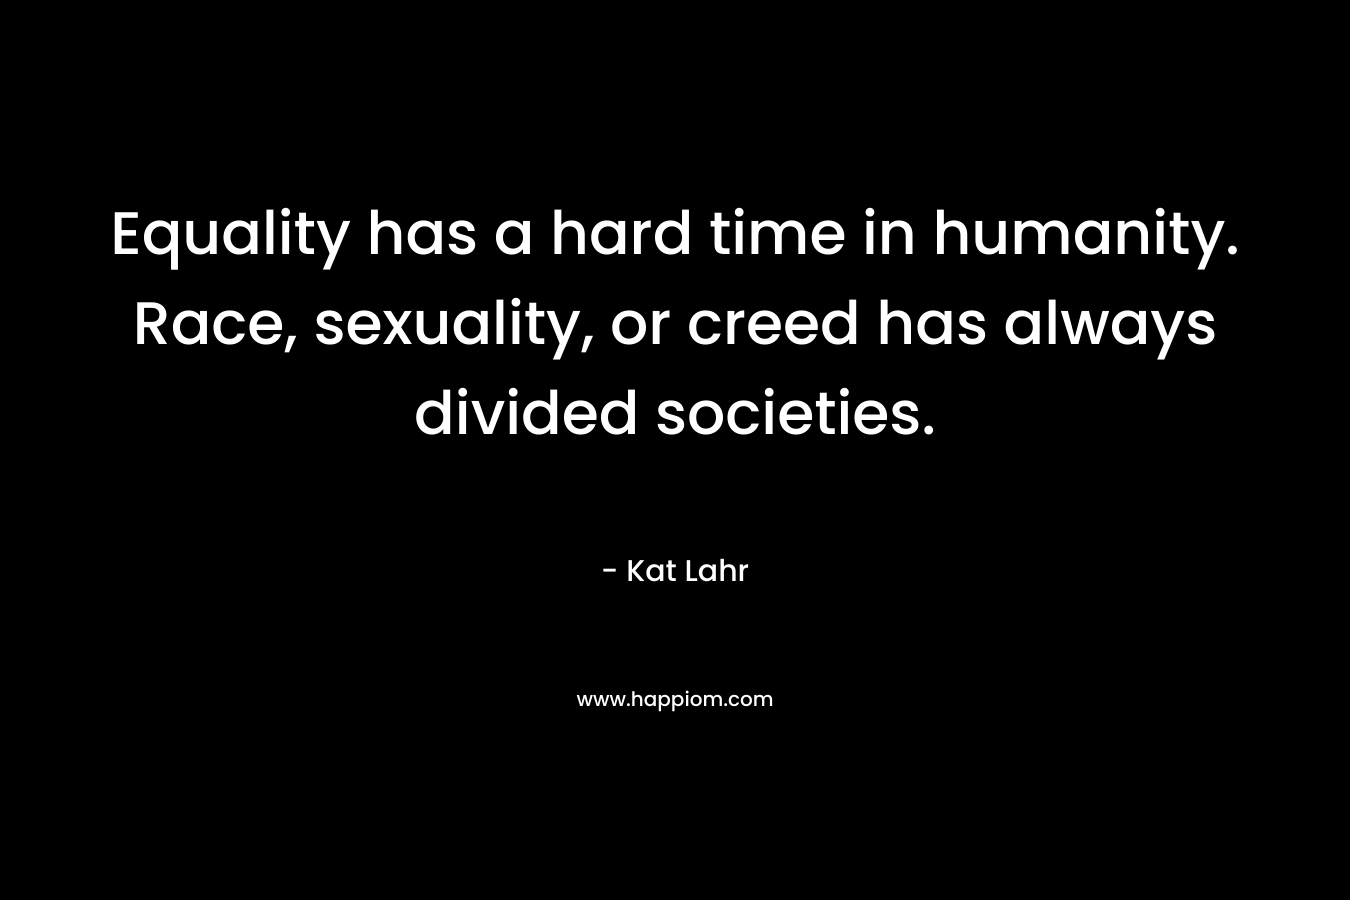 Equality has a hard time in humanity. Race, sexuality, or creed has always divided societies.